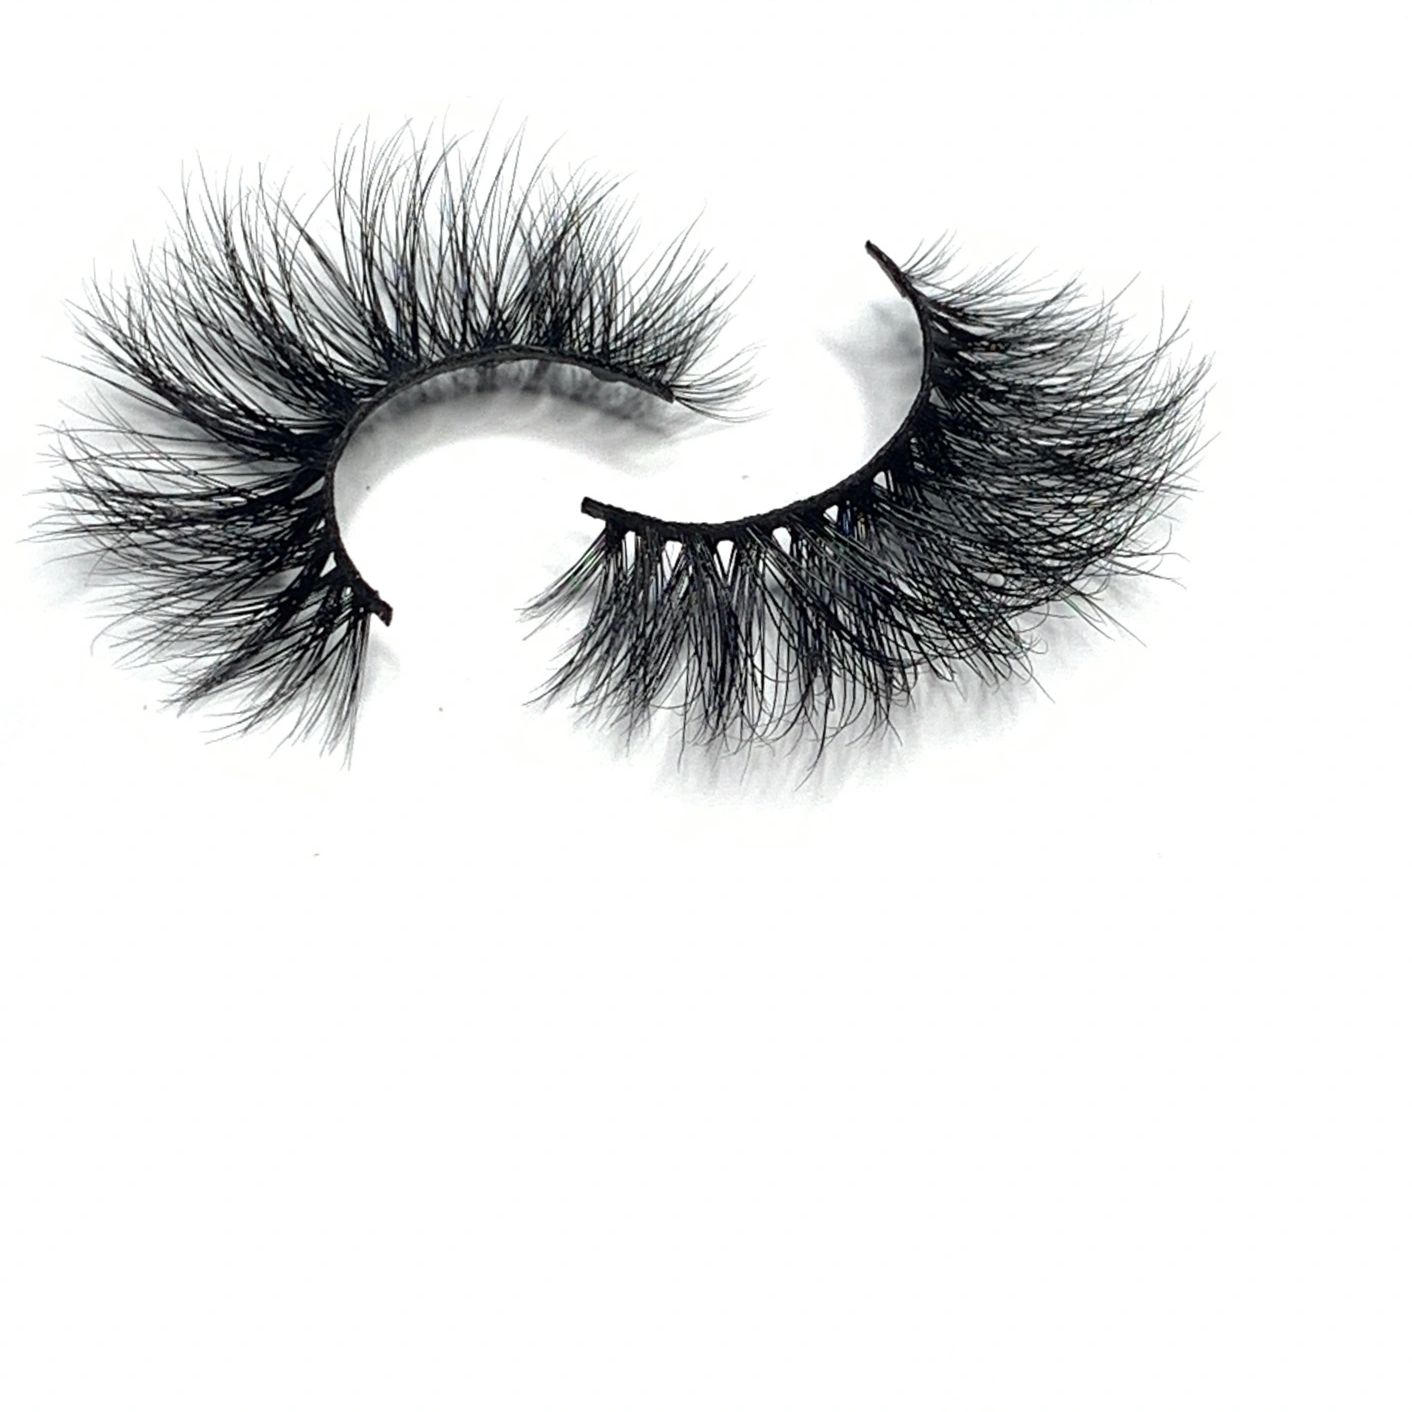 18mm Mink Lashes
- Light weight/ Wispy/ Round Flare
- Trim band to eye length 
- Store for longer 